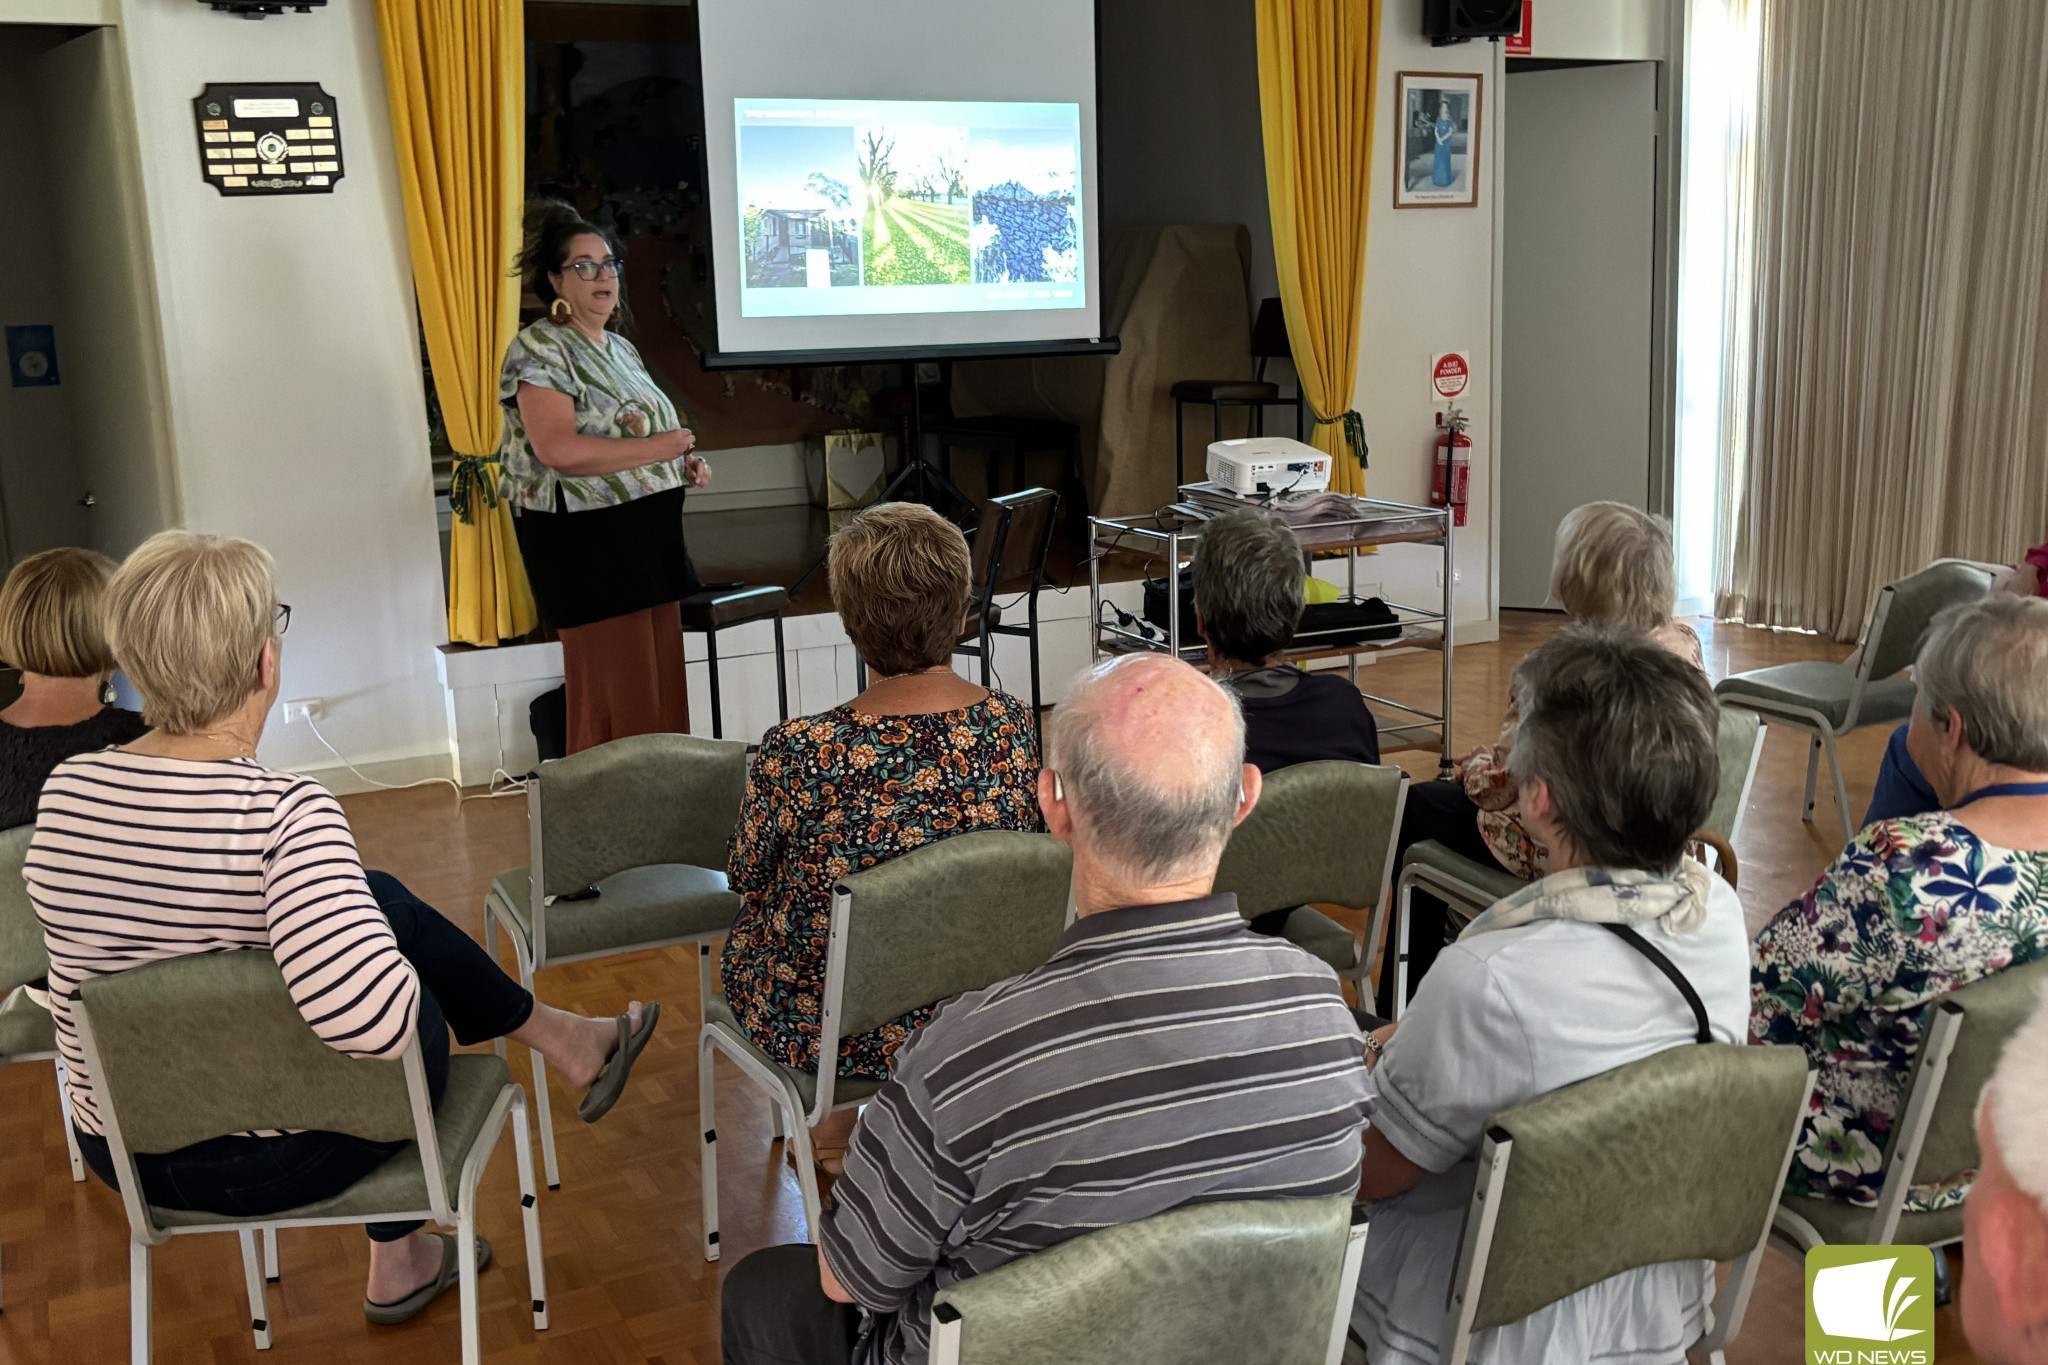 Vital service: Camperdown Community House's Emily Mercer spoke to members of U3A Corangamite about the Corangamite Food Bank service.